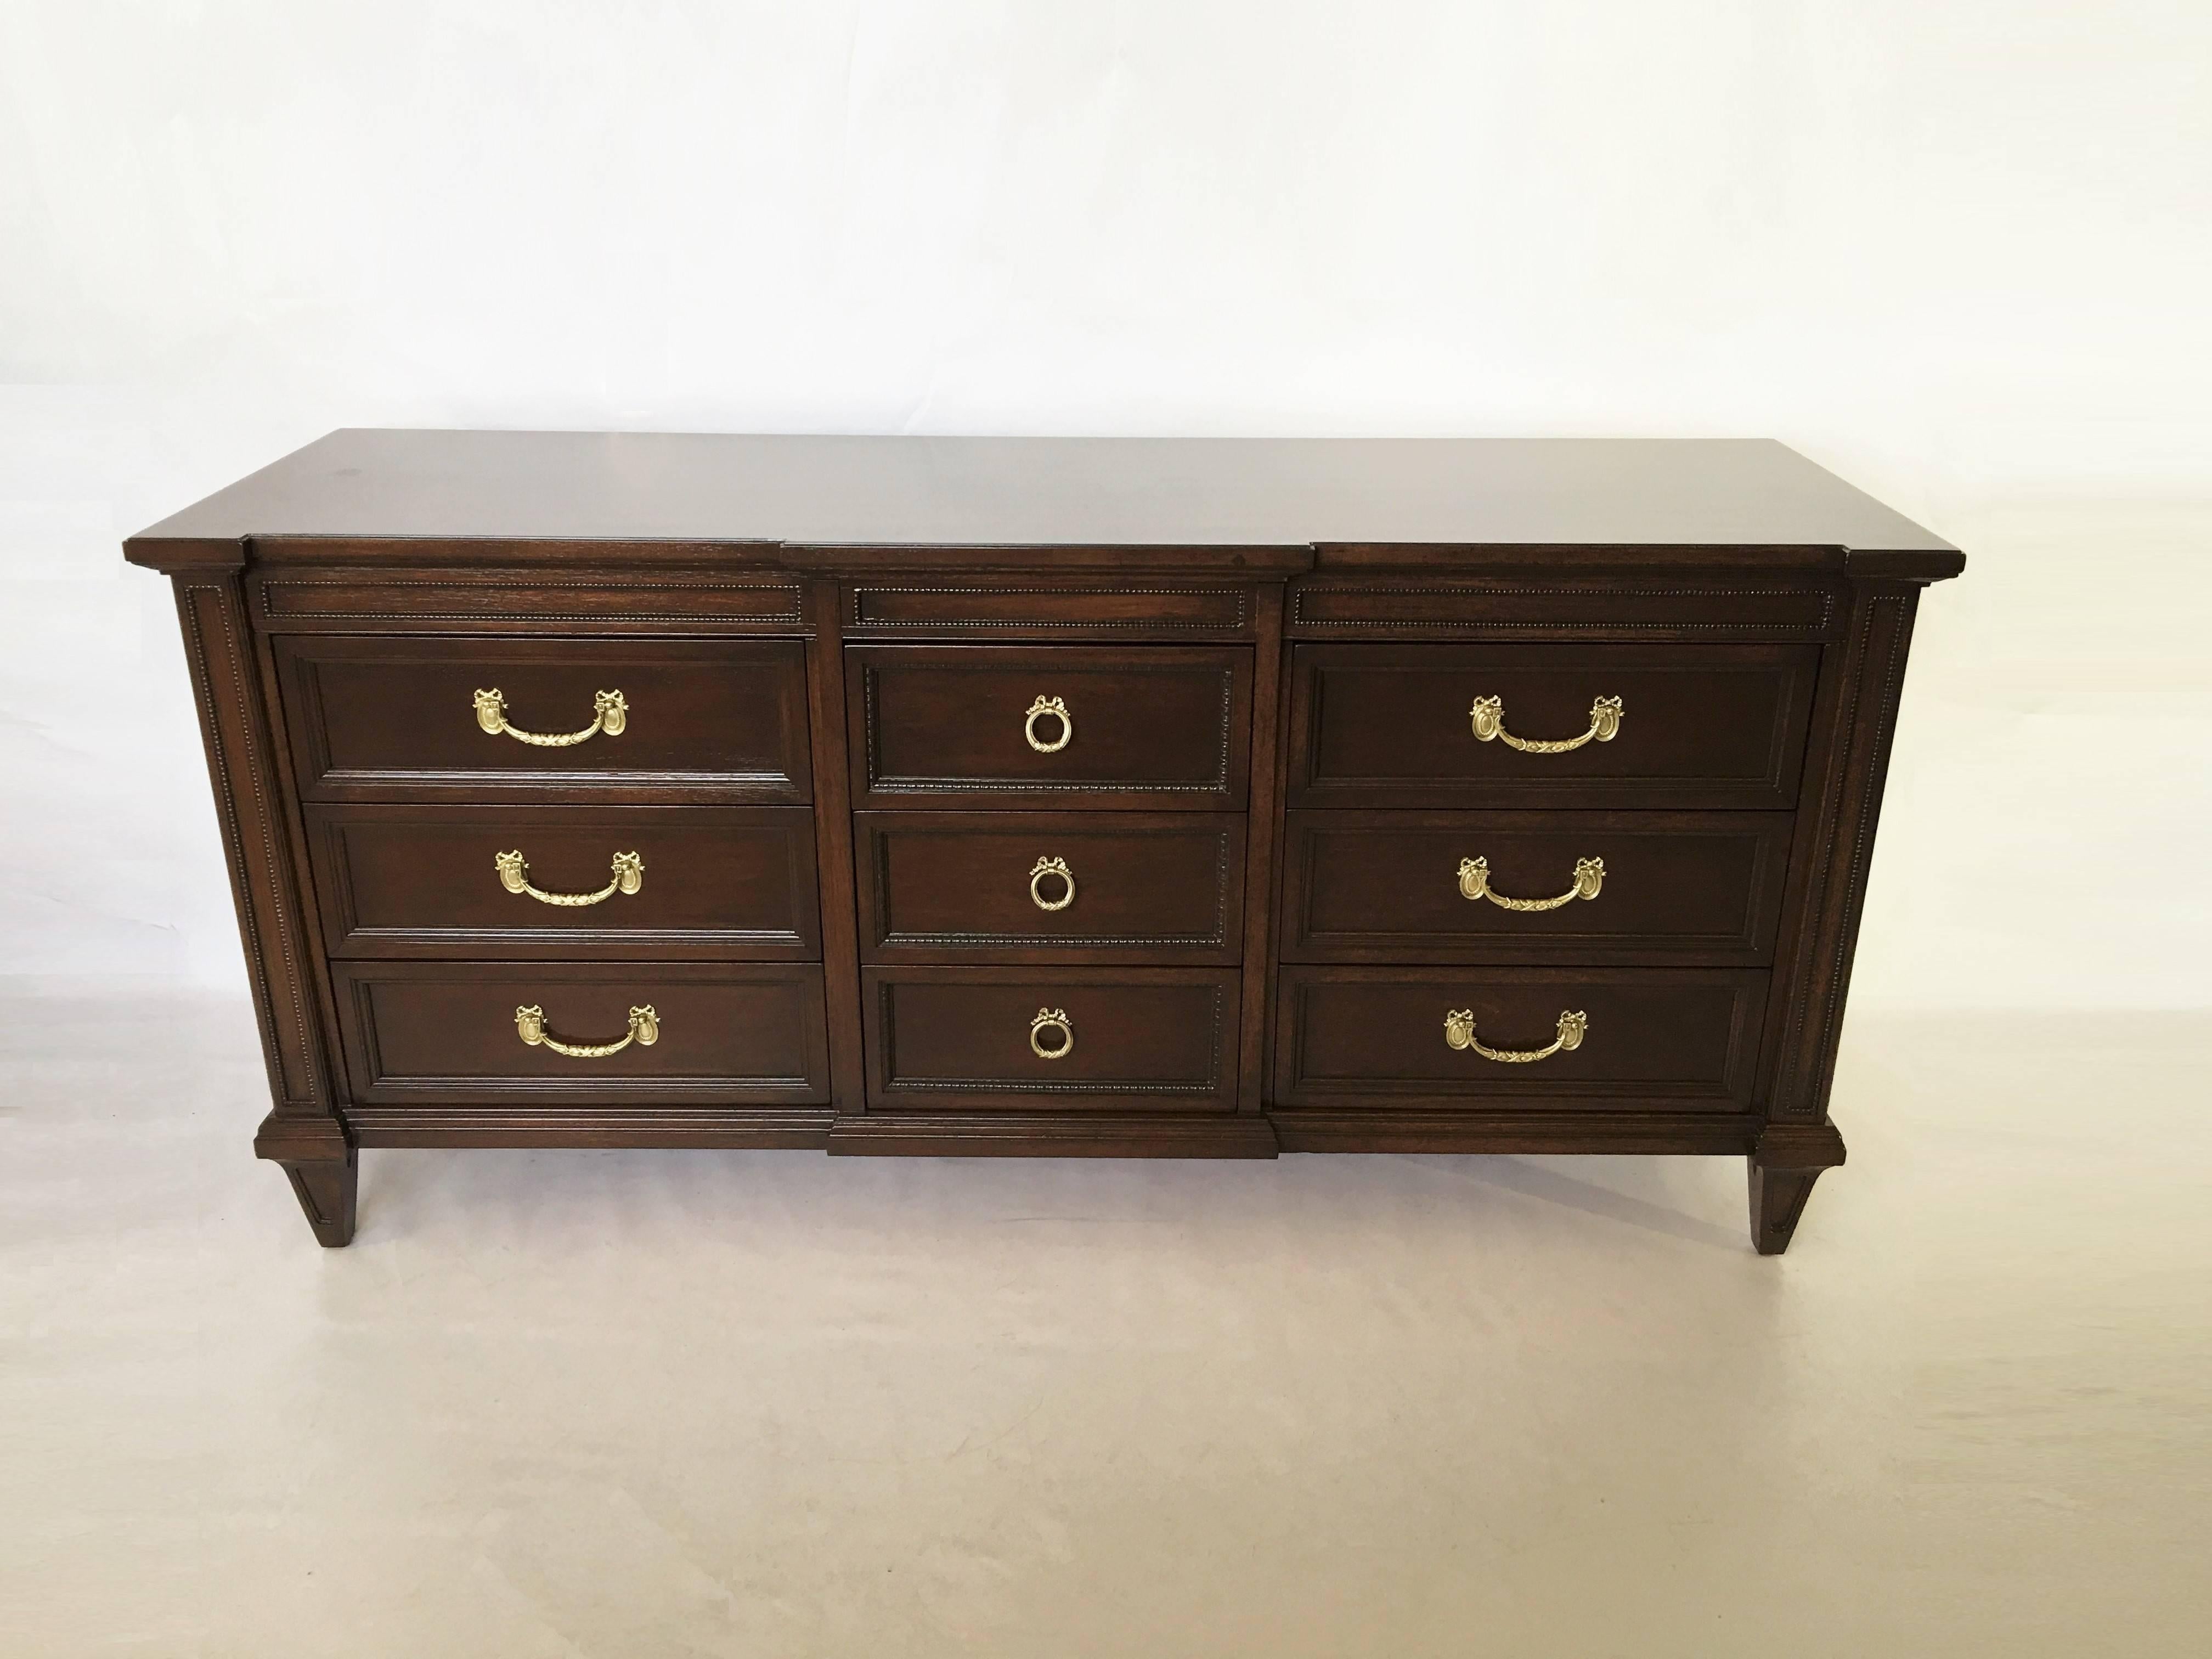 This 1970s vintage Regency-style dresser is made of mahogany wood that has been finished in a rich dark stain. The facade of the chest features nine drawers in three rows with ample storage space on tapered legs. The drawers have decorative brass